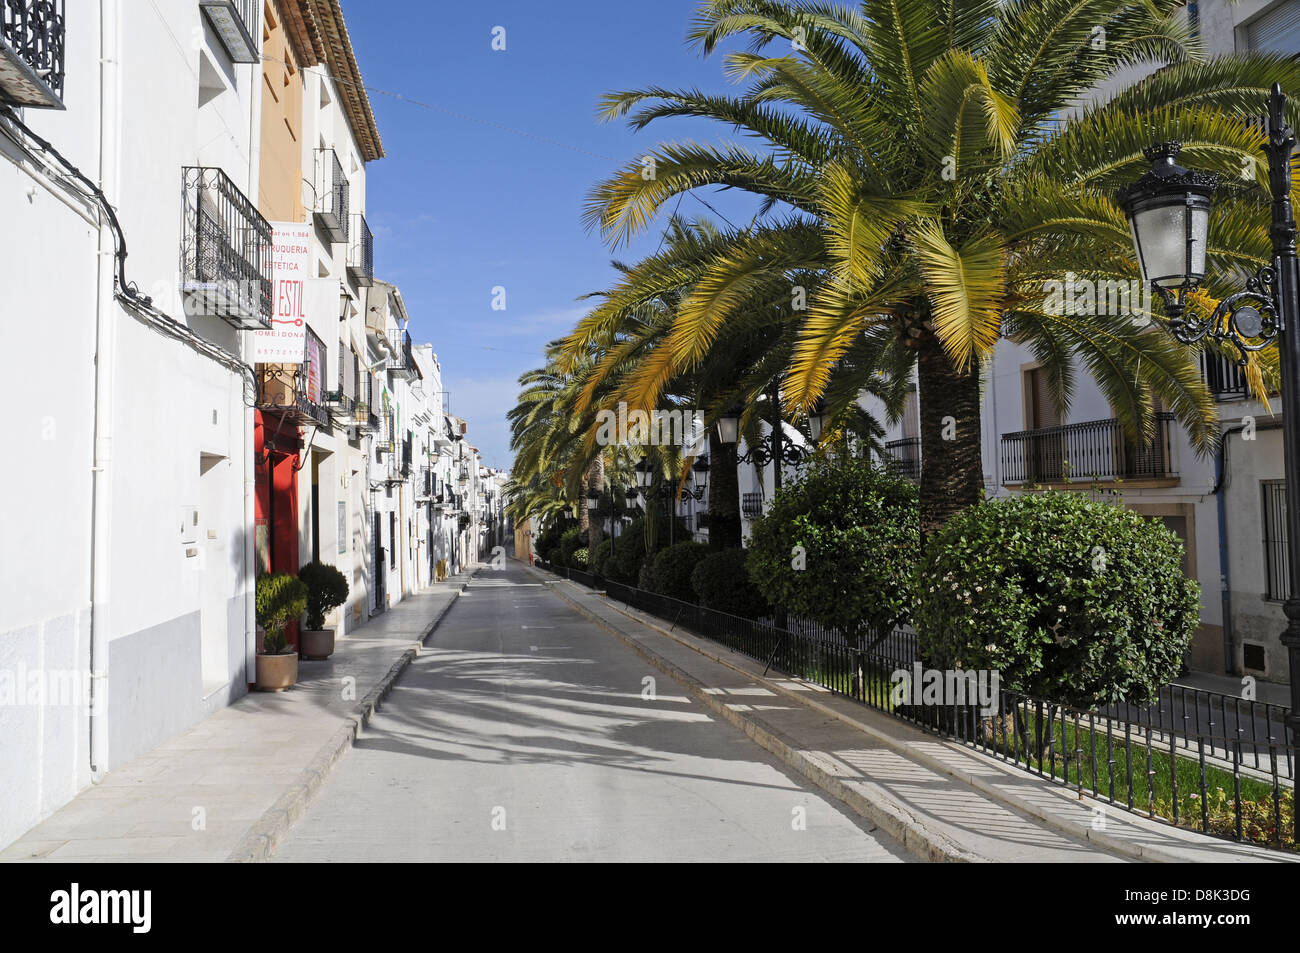 Road with palm trees in the old town Stock Photo